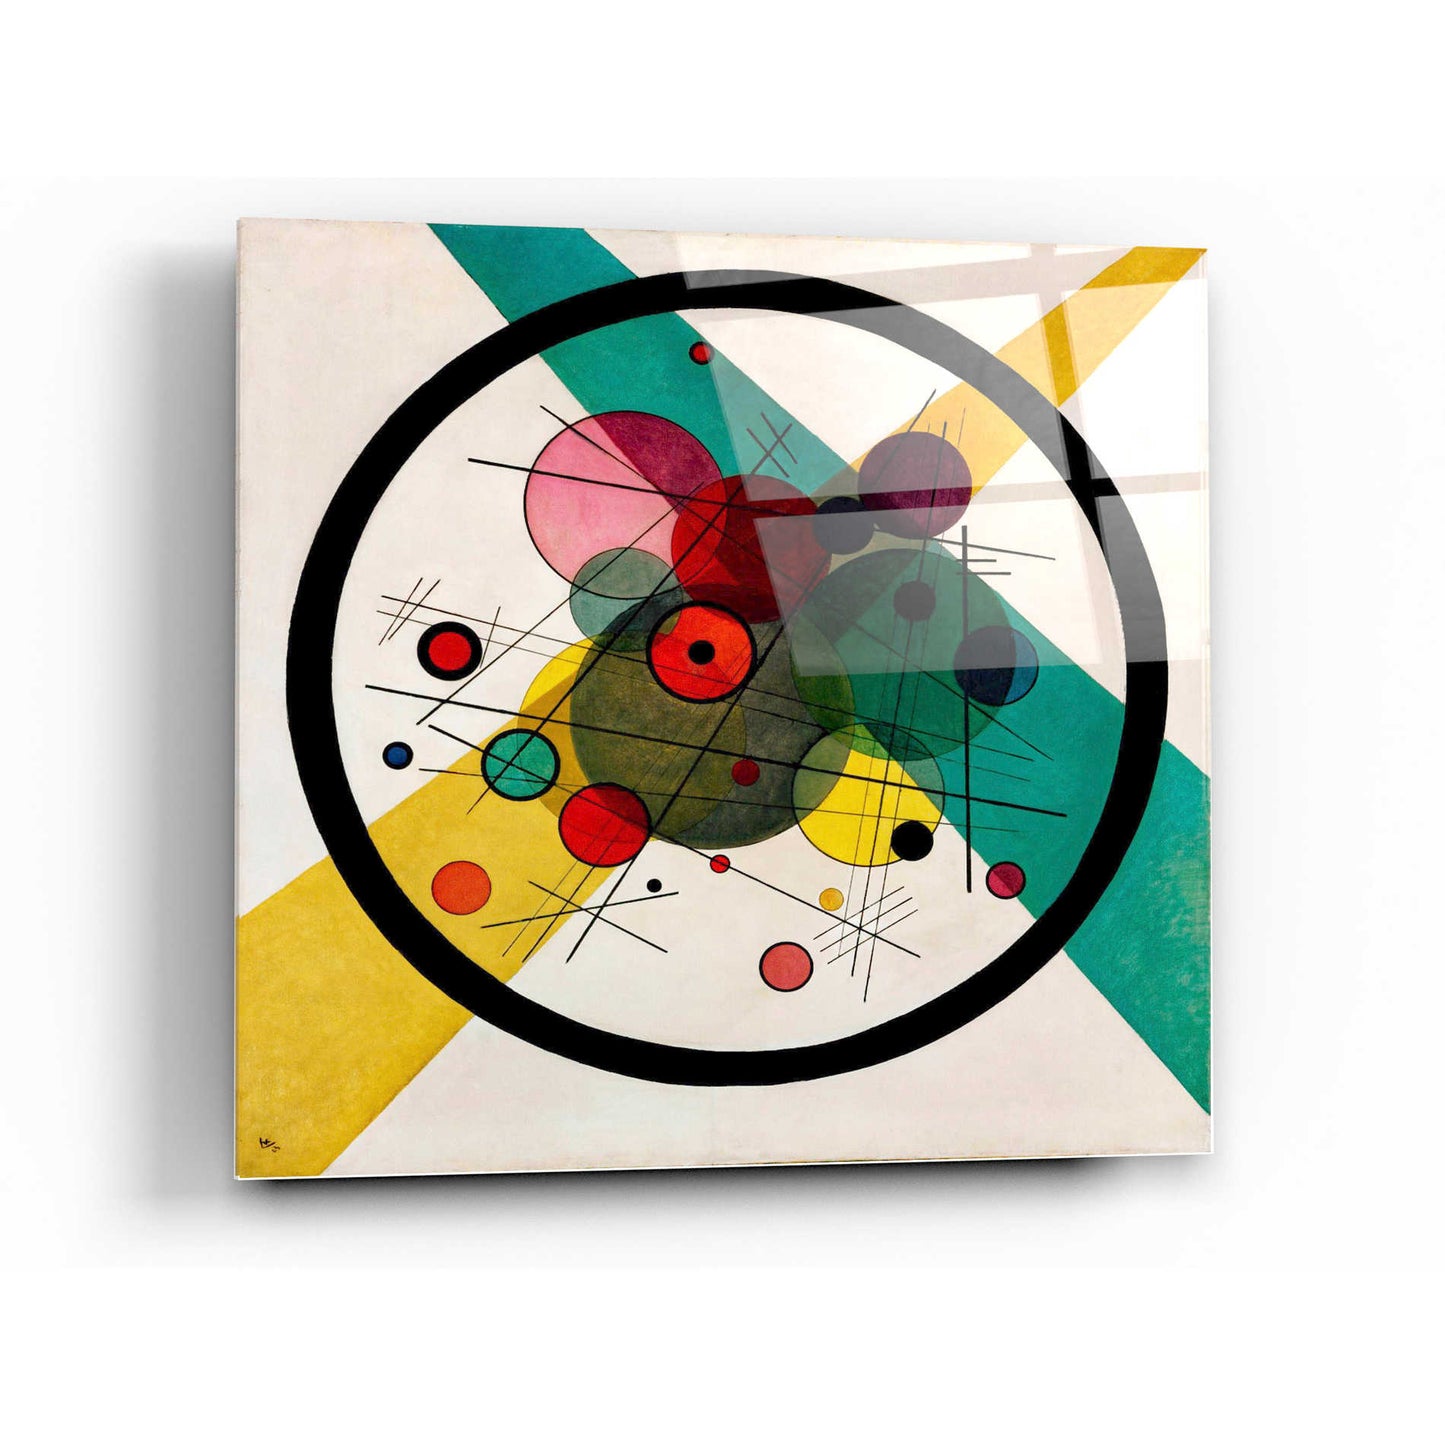 Epic Art 'Circles In A Circle' by Wassily Kandinsky Acrylic Glass Wall Art